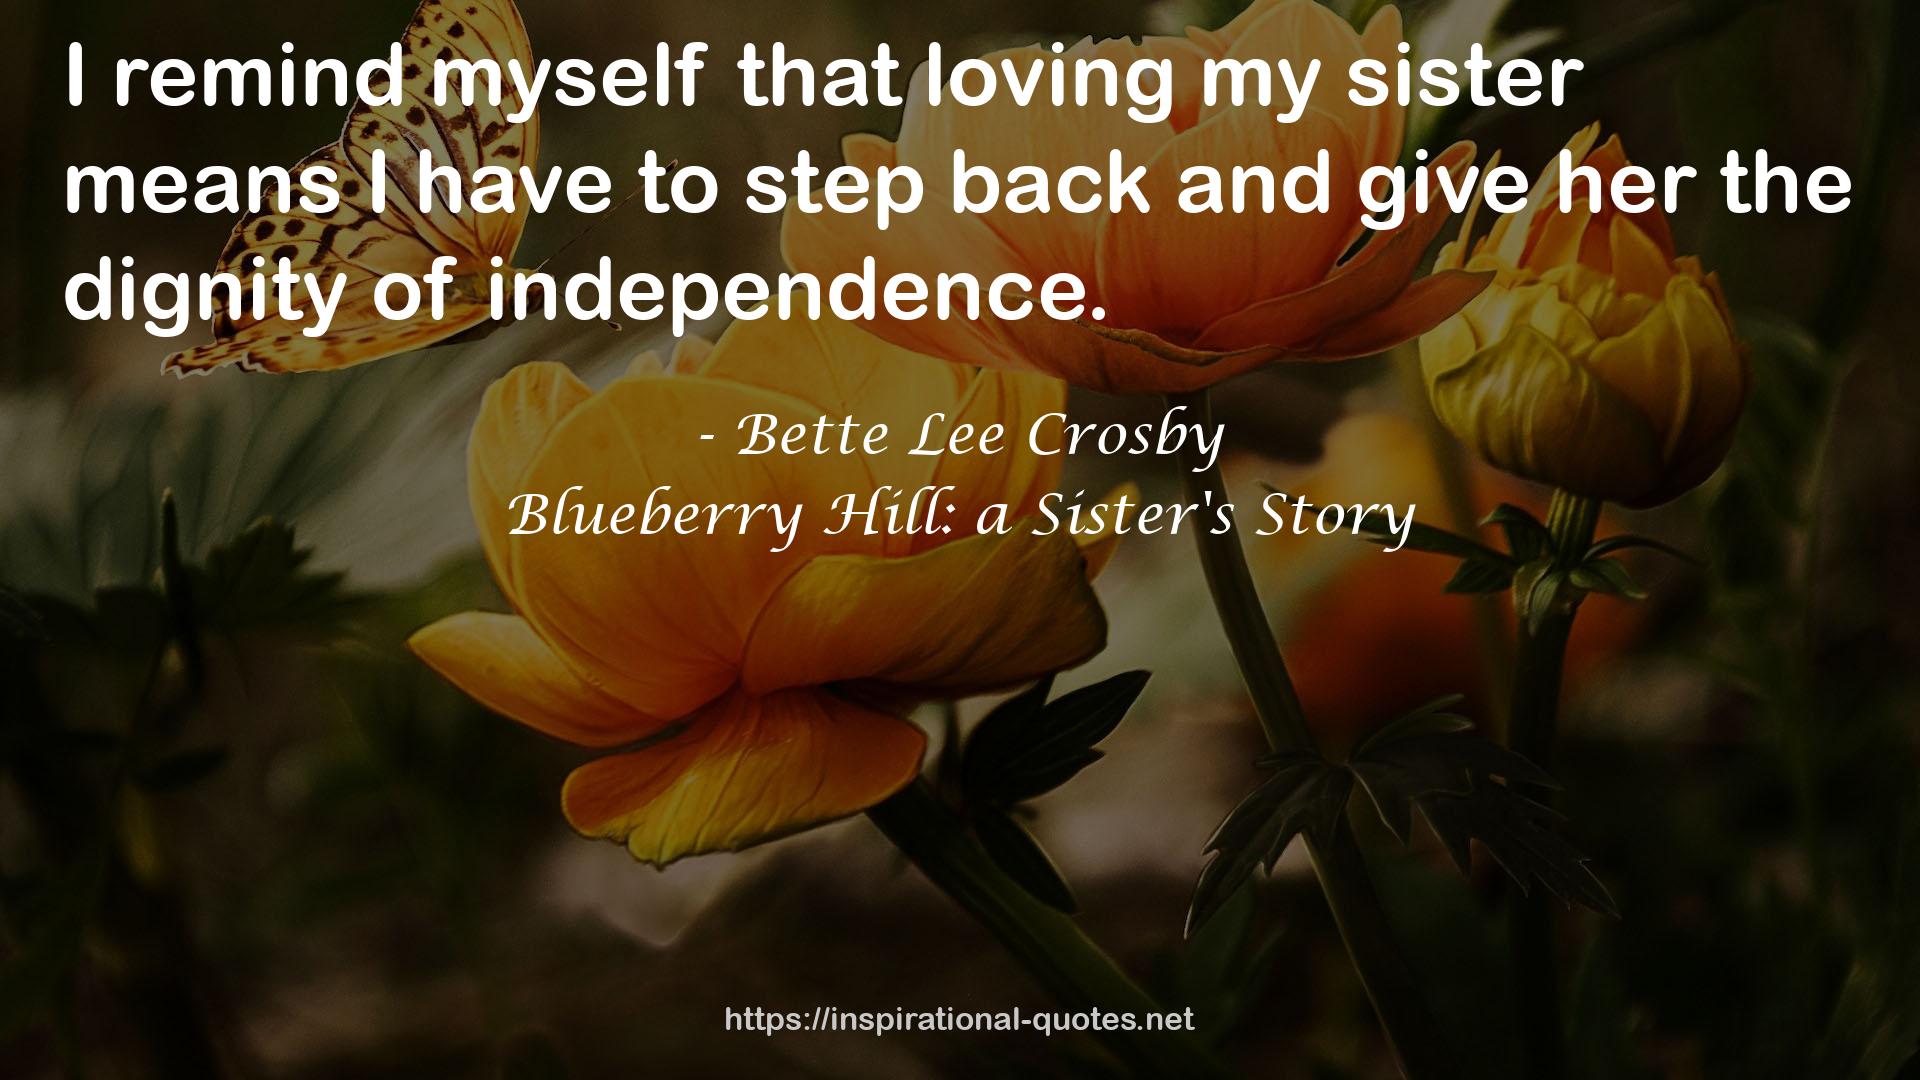 Blueberry Hill: a Sister's Story QUOTES